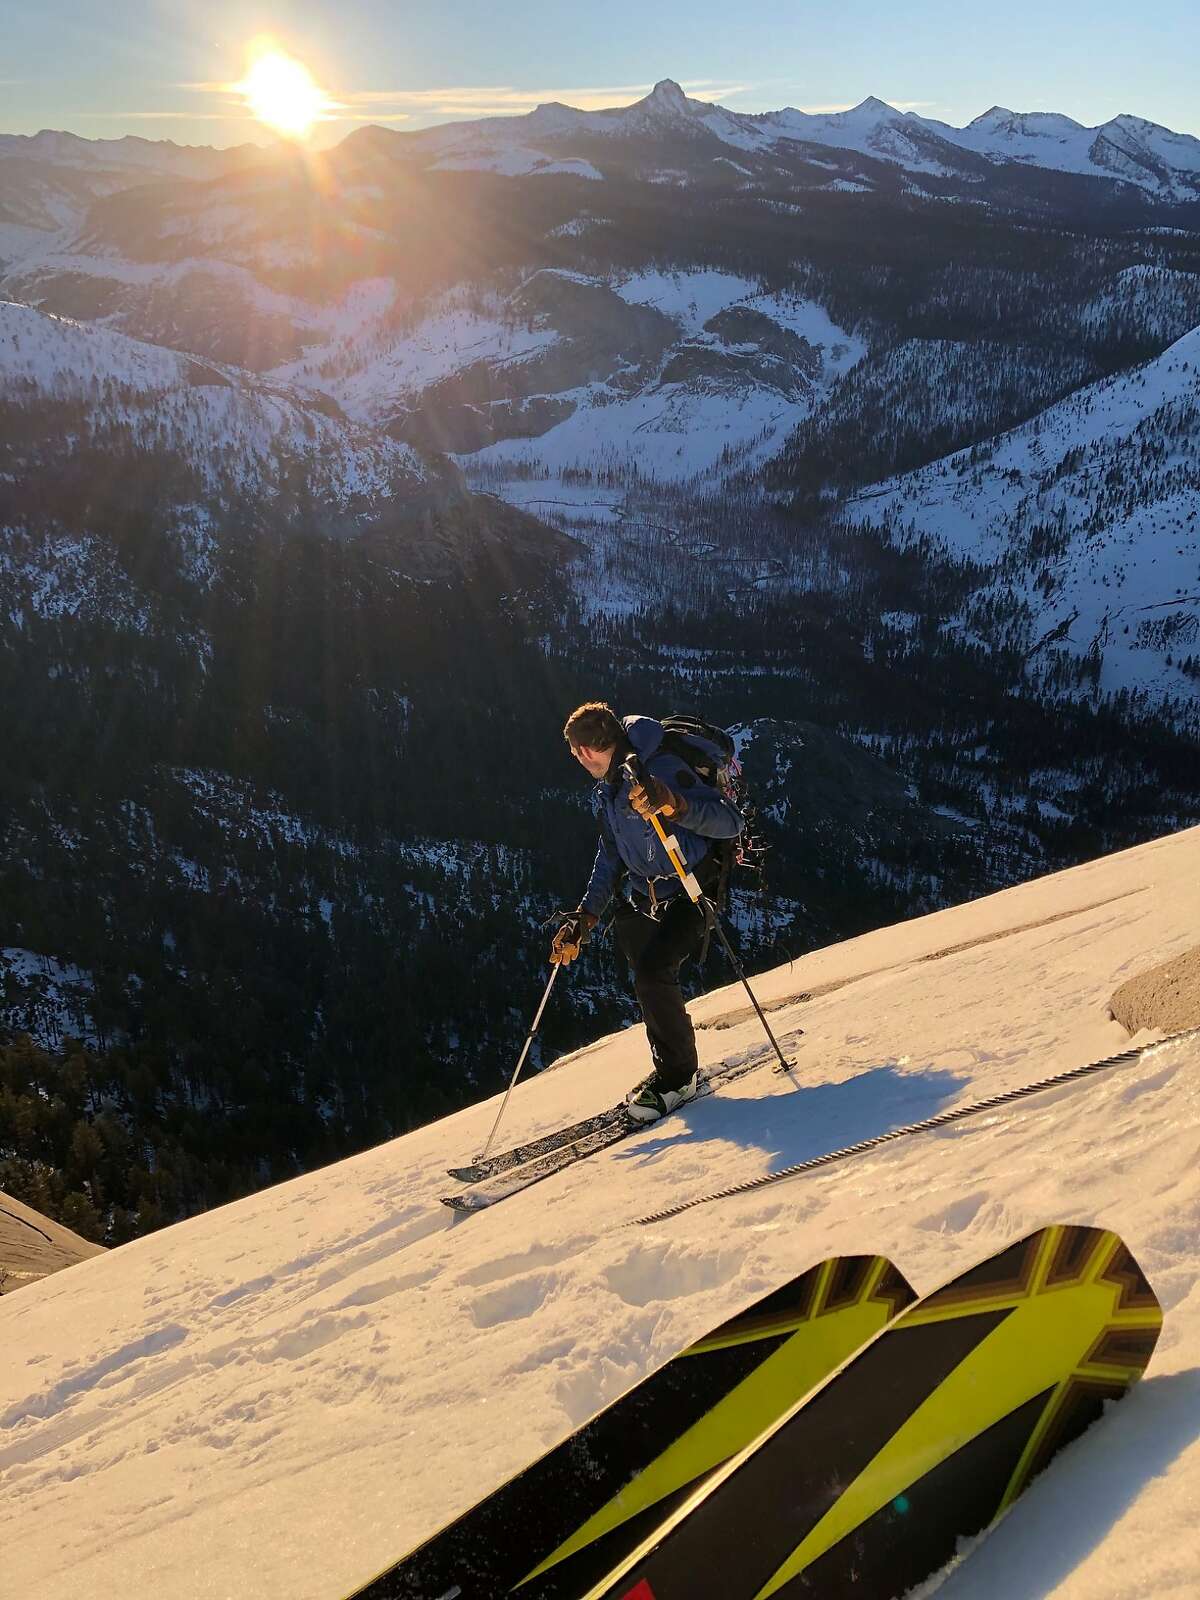 Zach Milligan (pictured) and Jason Torlano look down into Yosemite Valley during a ski descent of Half Dome